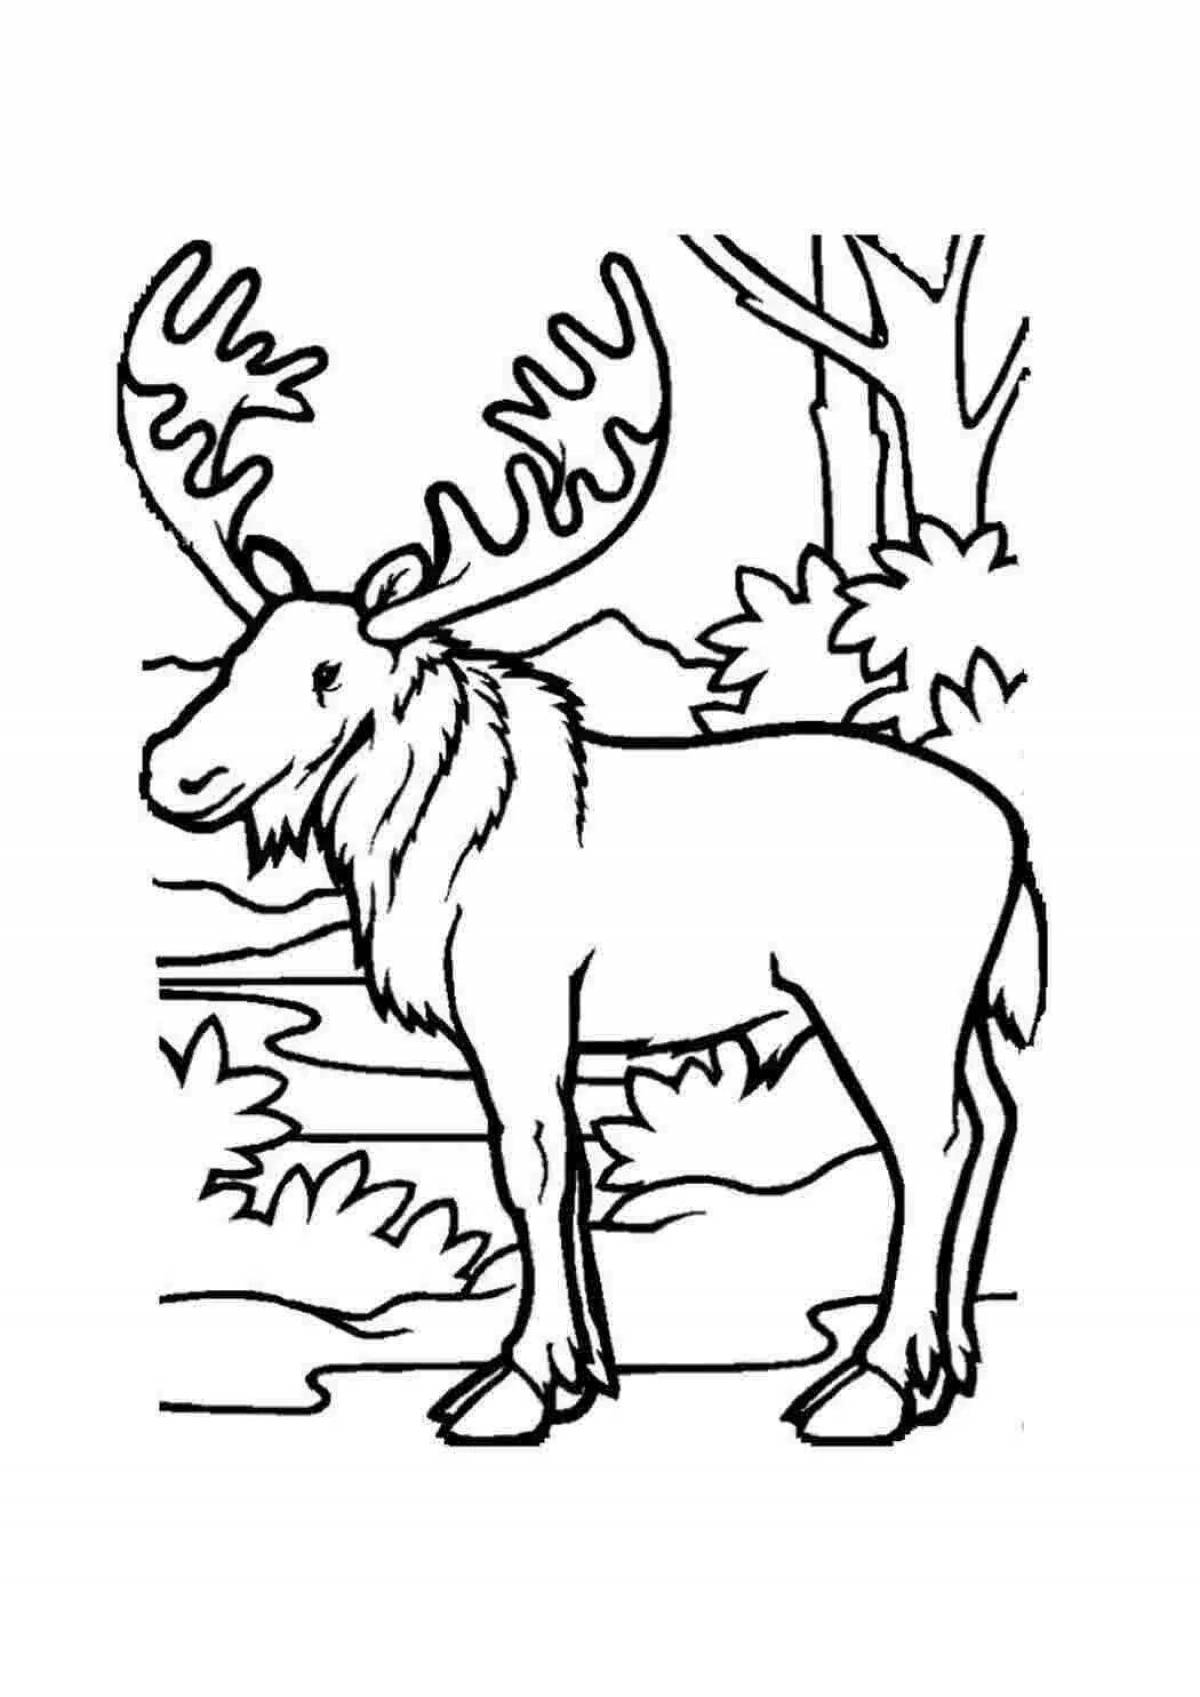 Dazzling forest animals coloring page for kids